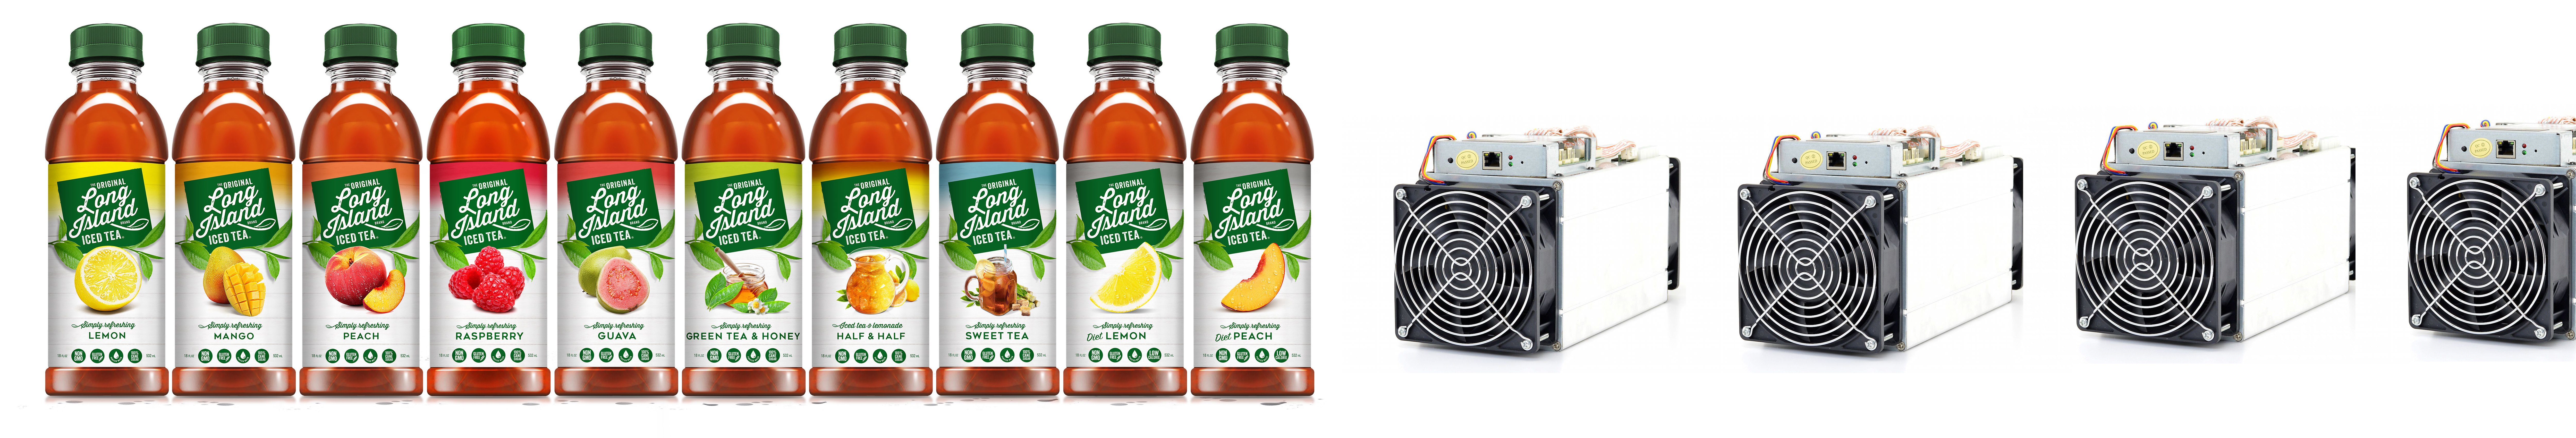 Former Iced Tea Firm Plans to Mine Bitcoin in the Nordic Region